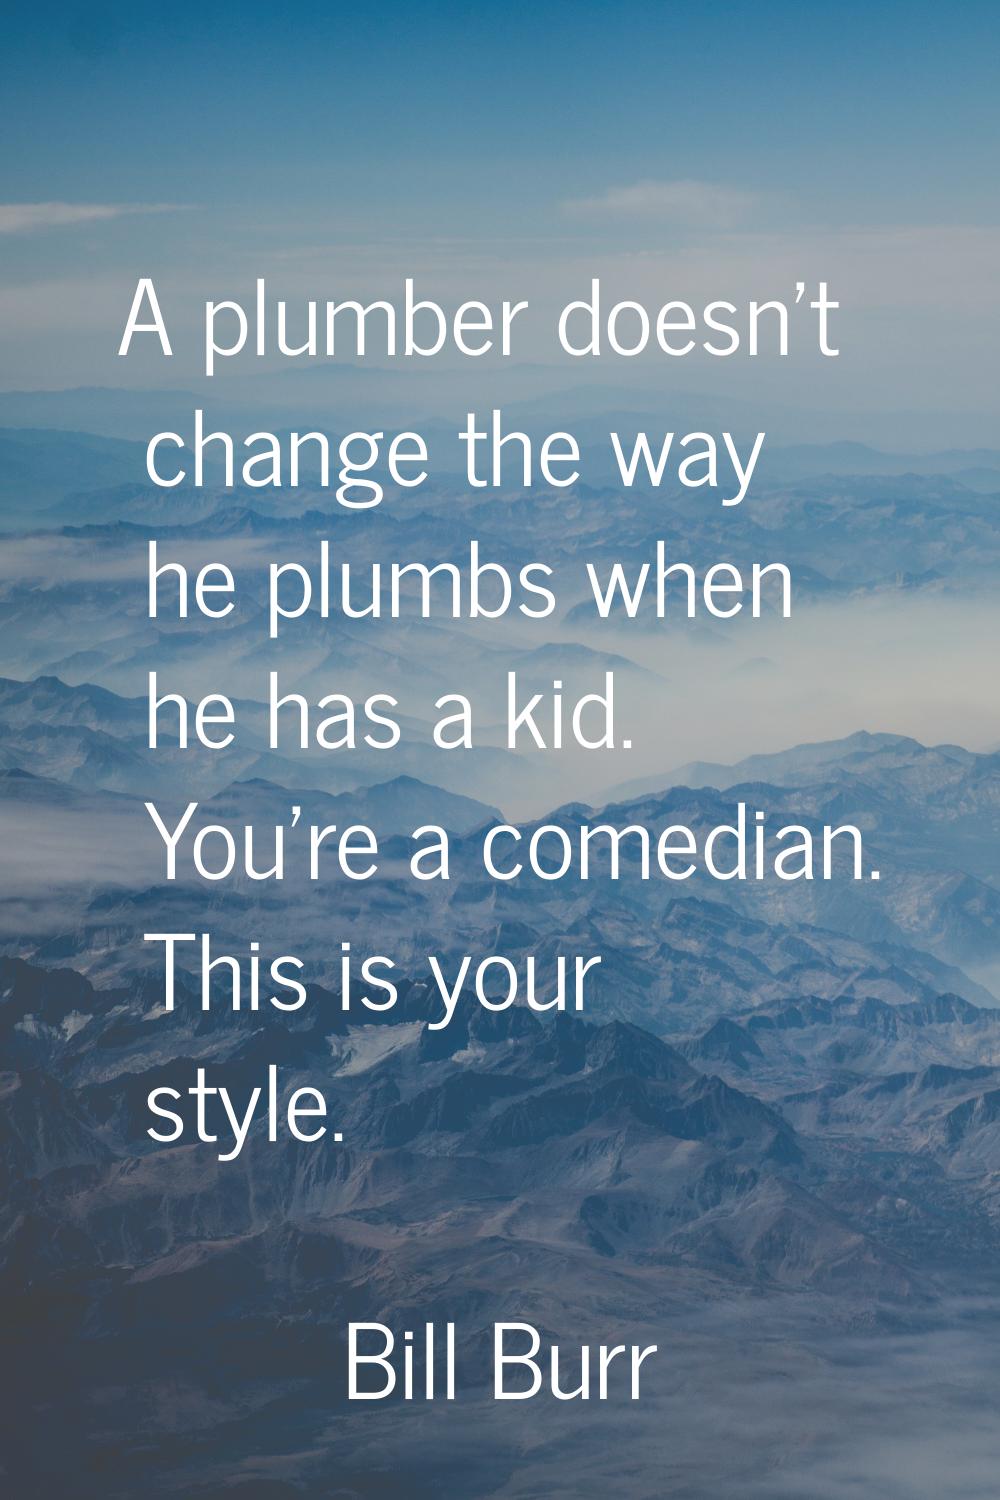 A plumber doesn't change the way he plumbs when he has a kid. You're a comedian. This is your style